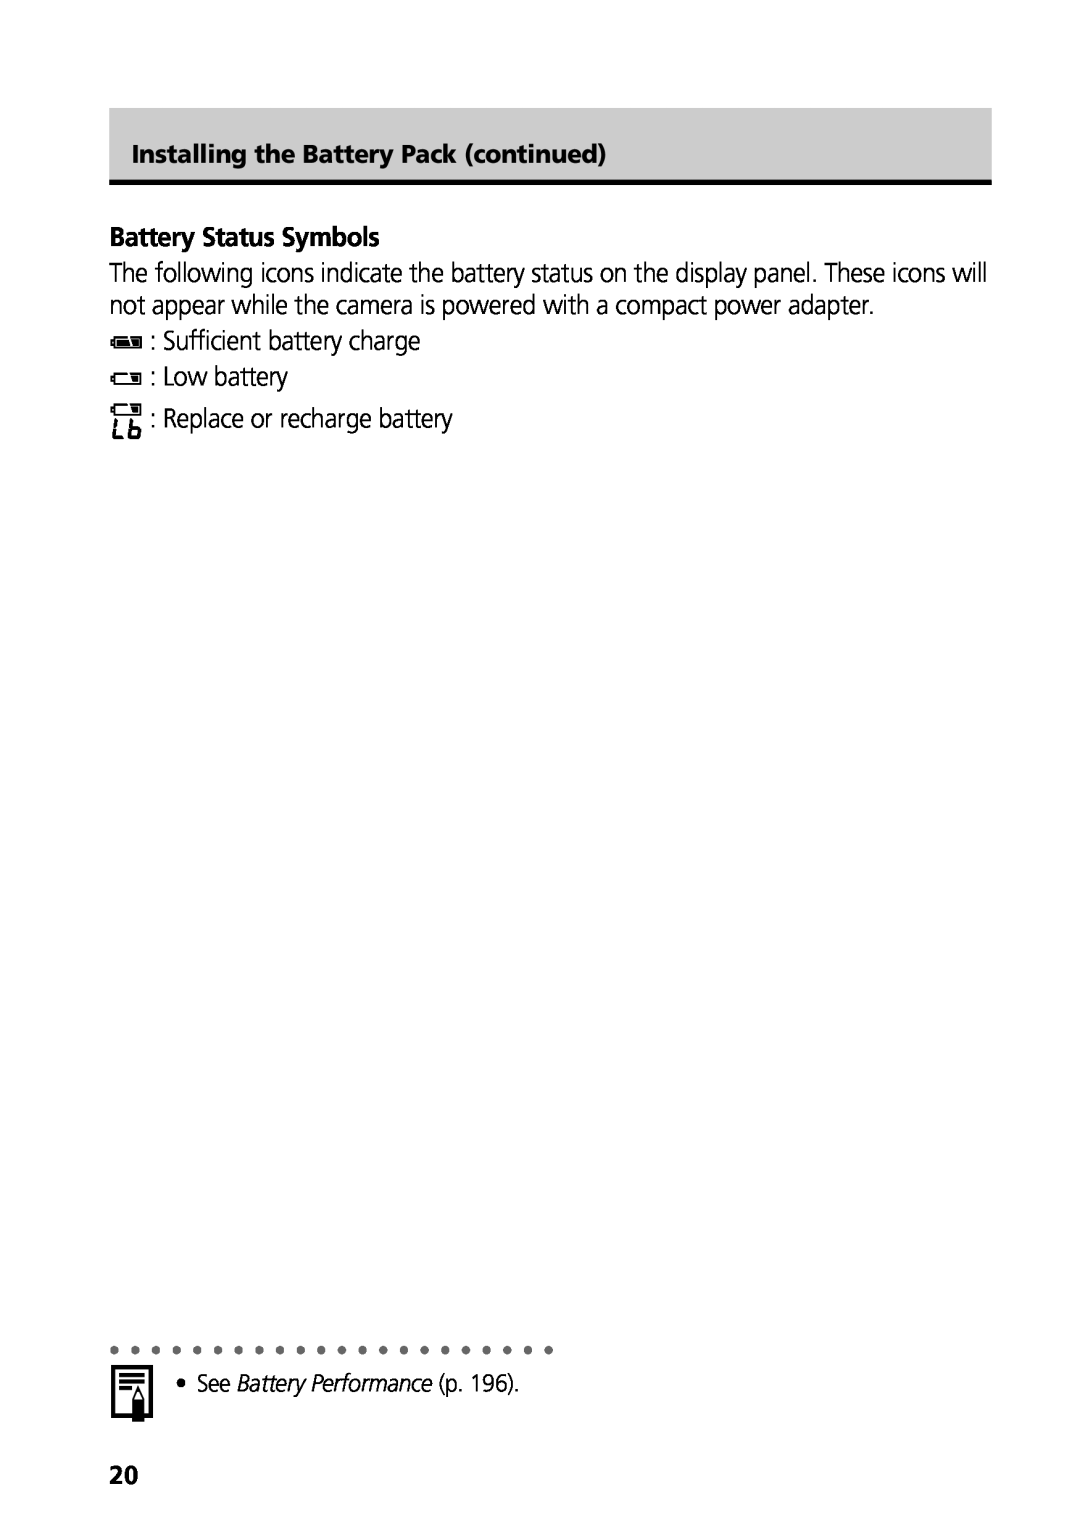 Canon G3 manual Battery Status Symbols, Sufficient battery charge Low battery Replace or recharge battery 